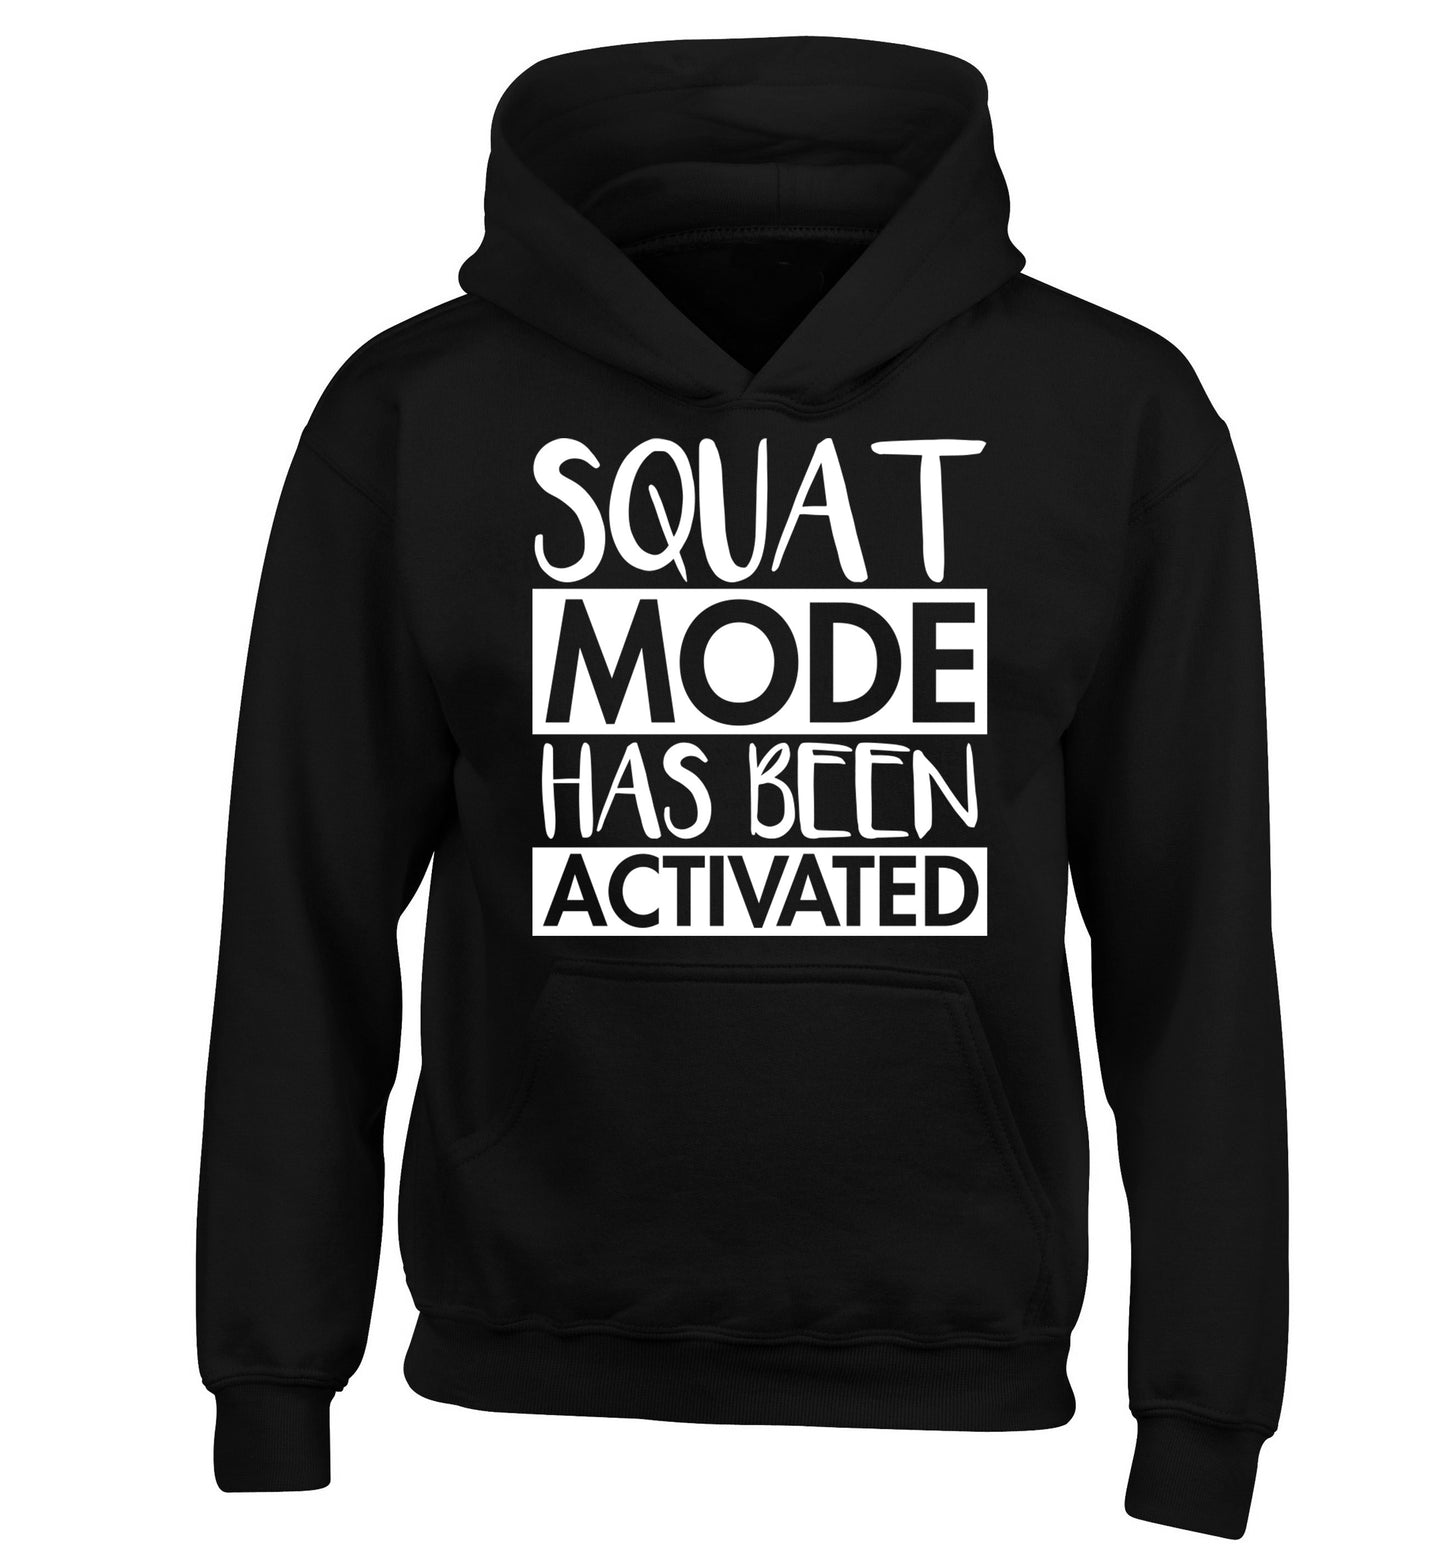 Squat mode activated children's black hoodie 12-14 Years